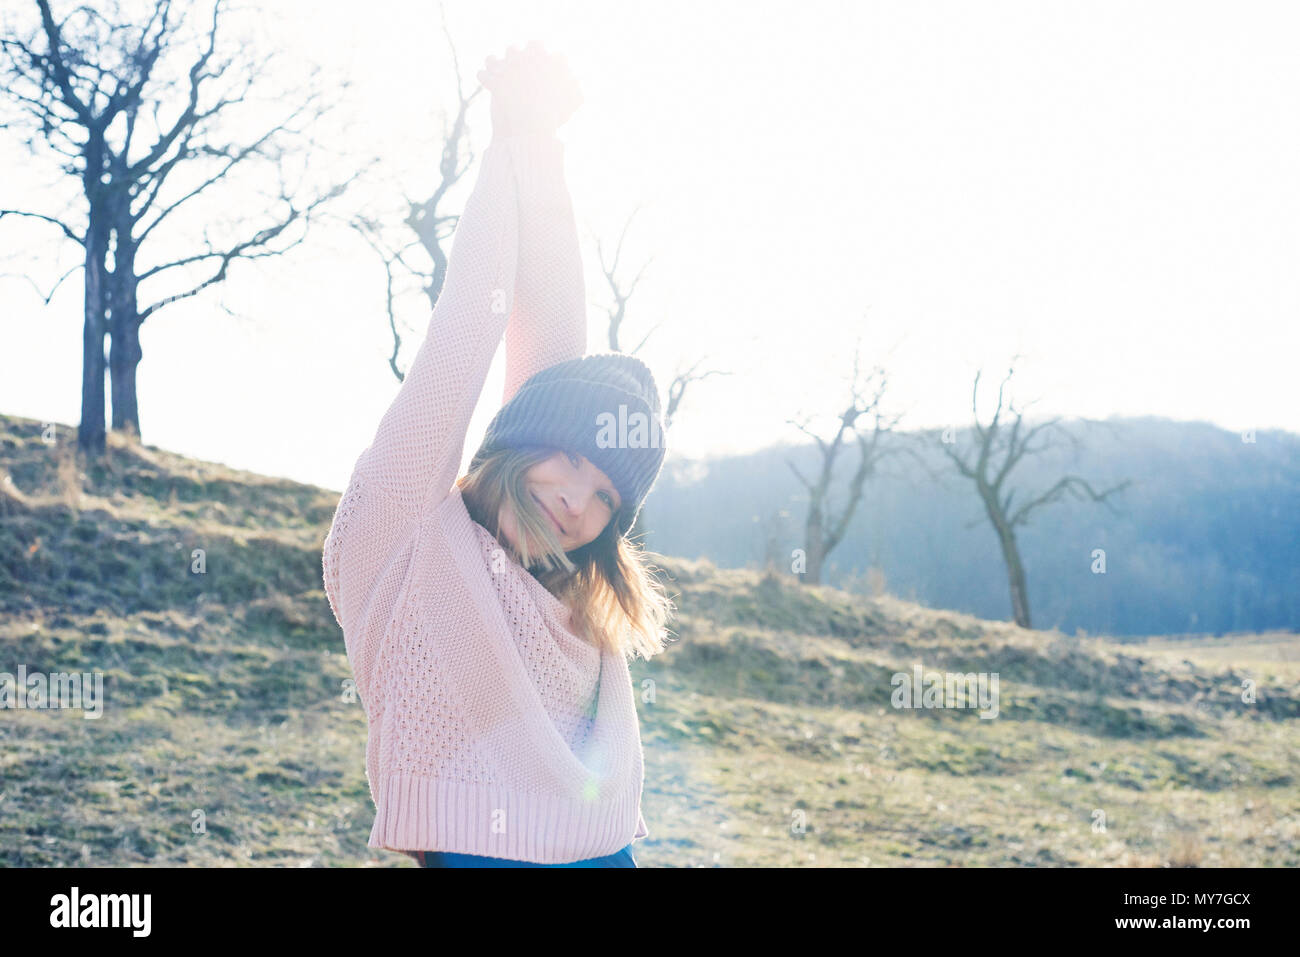 Portrait of mid adult woman with arms raised in sunlit field Stock Photo